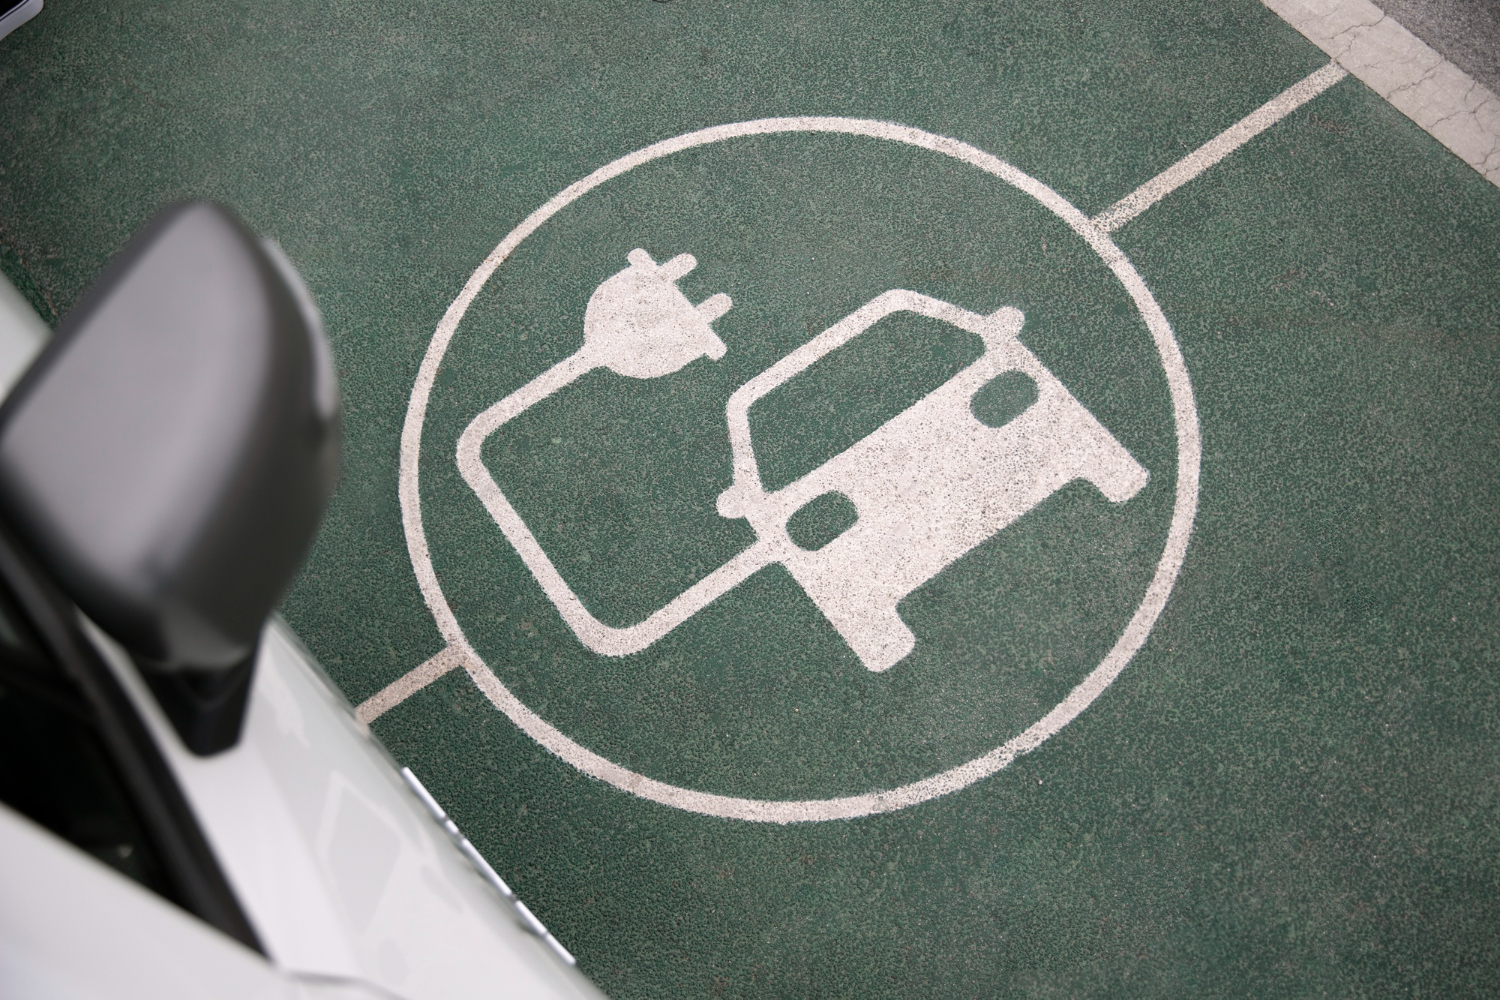 Central Europe set to secure EV battery recycling investment landscape